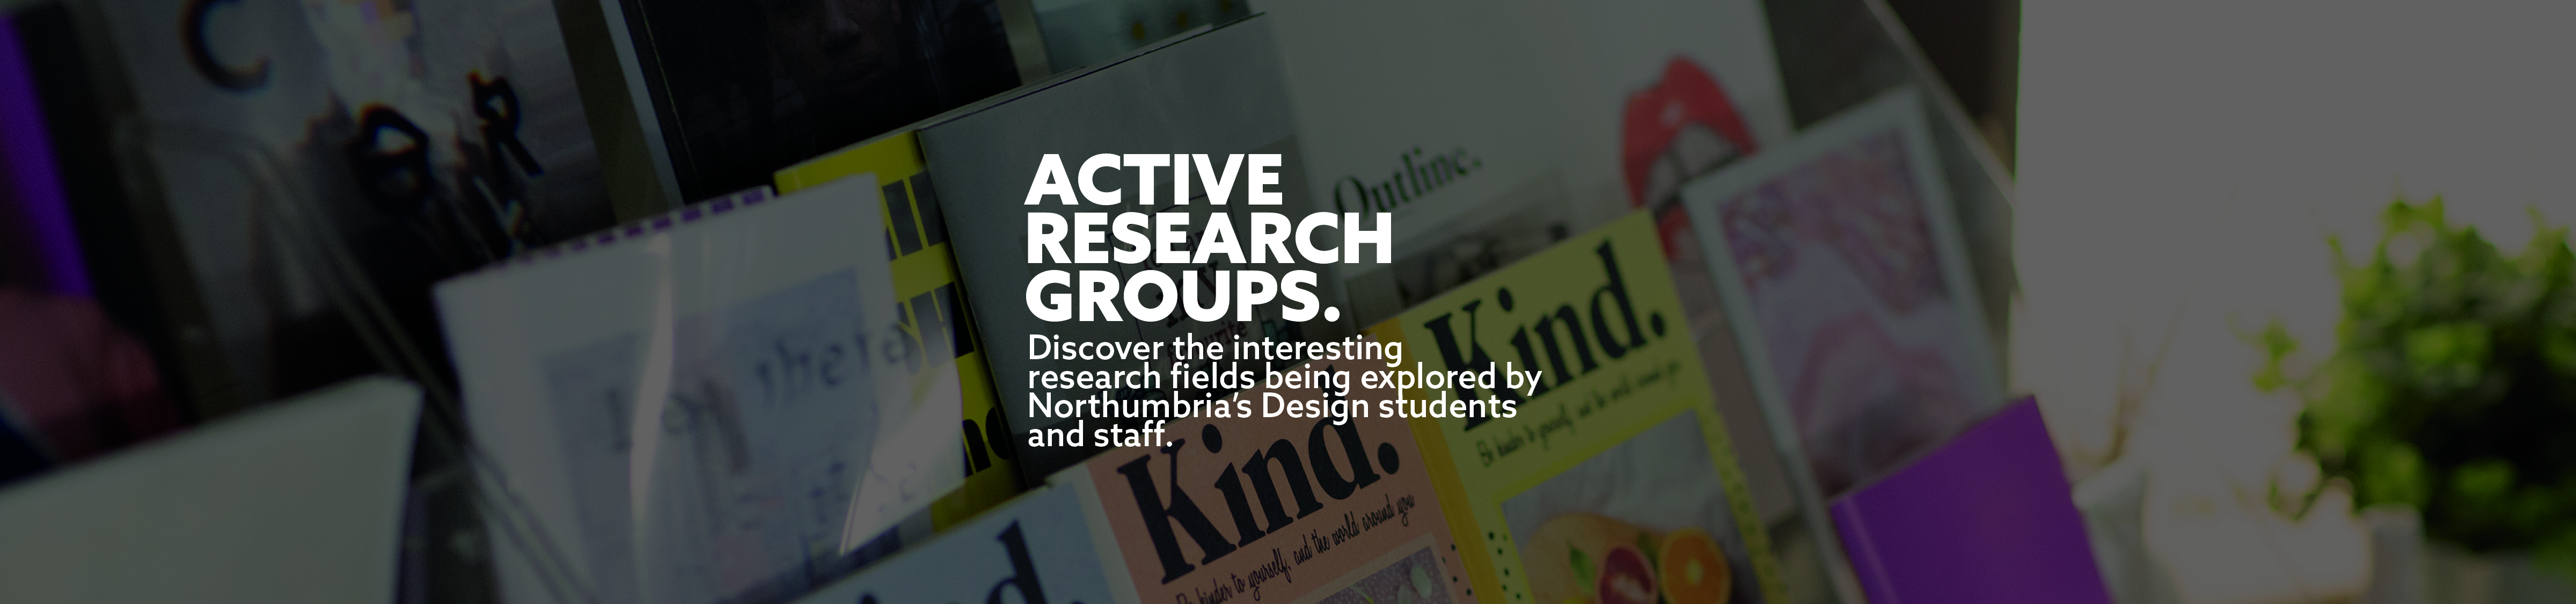 Active research groups in department